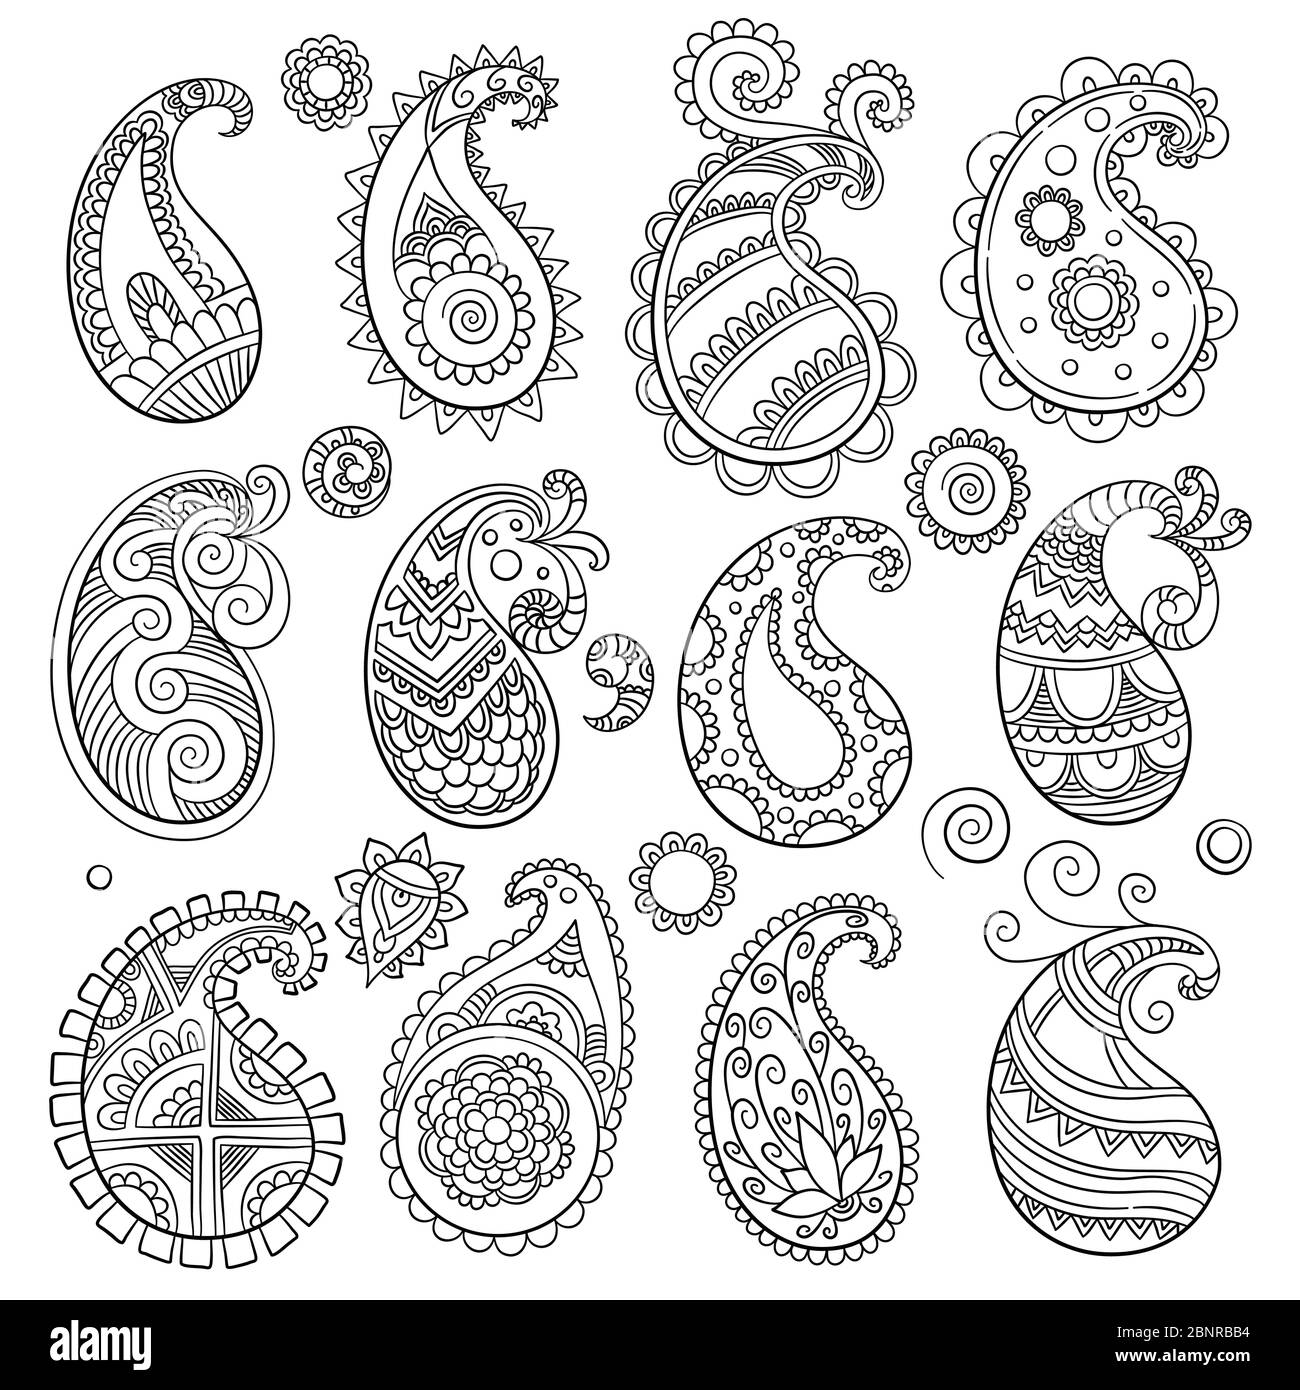 Simple paisley pattern. Traditional eastern culture decoration textile elements isolated on white background Stock Vector